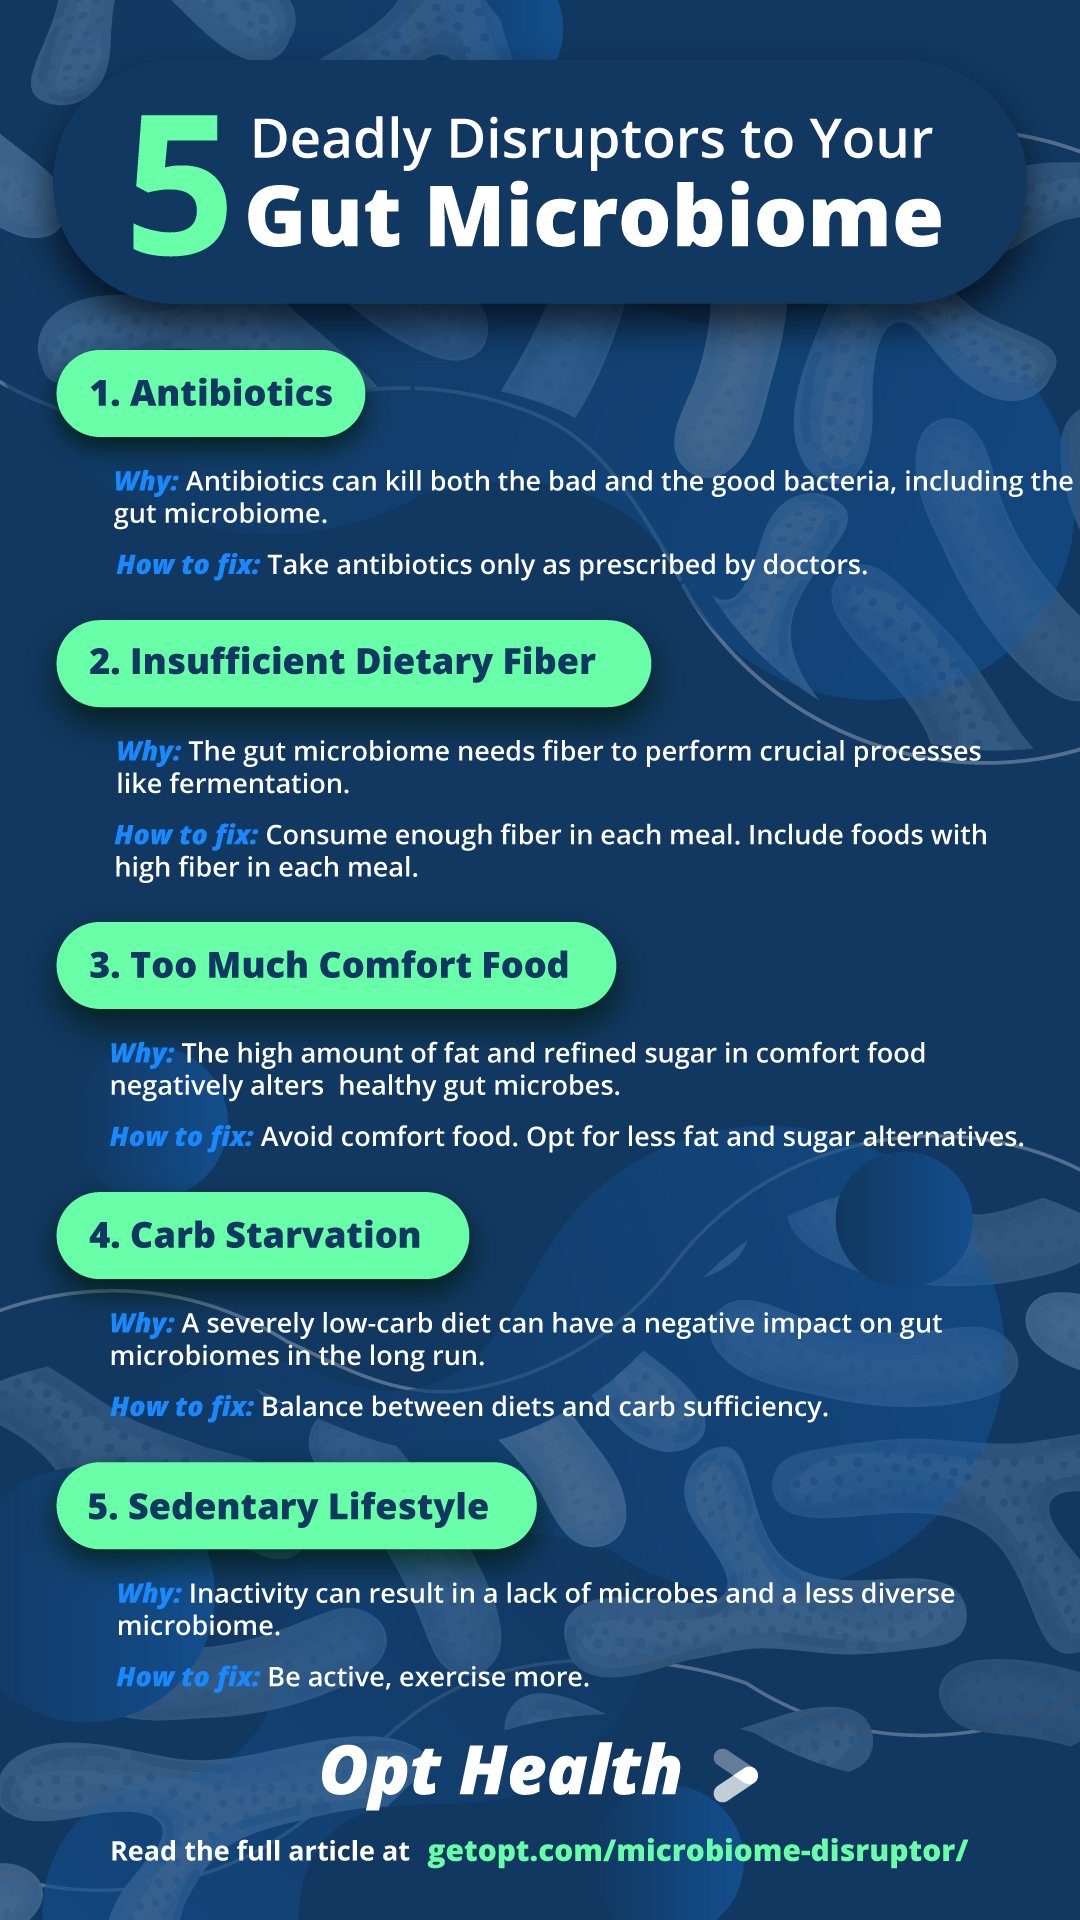 OH_Microbiome_FB PIN IGS LI TT | 10 Deadly Disruptors to Your Gut Microbiome